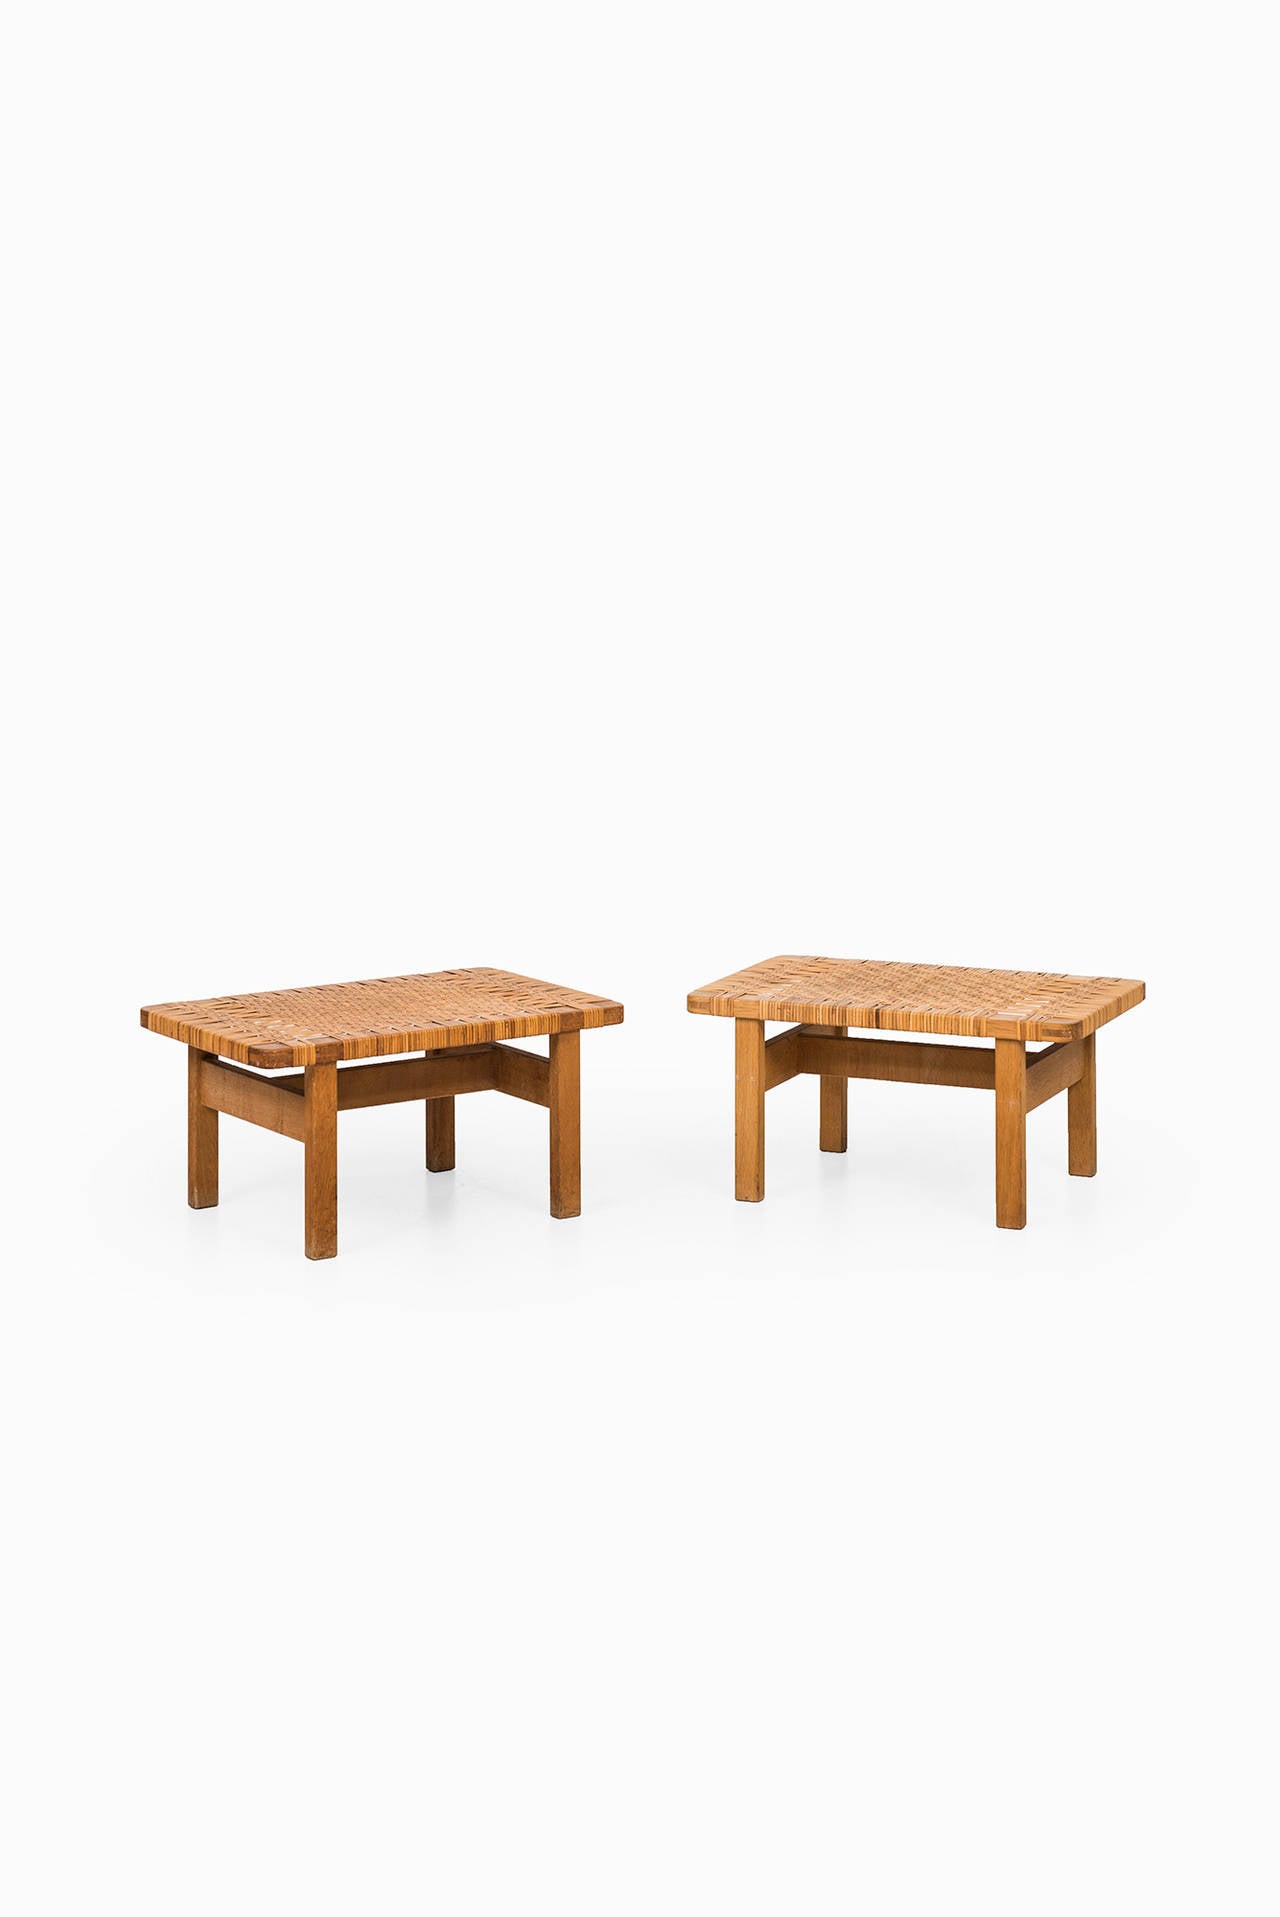 Rare pair of side tables in oak and woven cane designed by Børge Mogensen. Produced by Frederica Stolefabrik in Denmark.